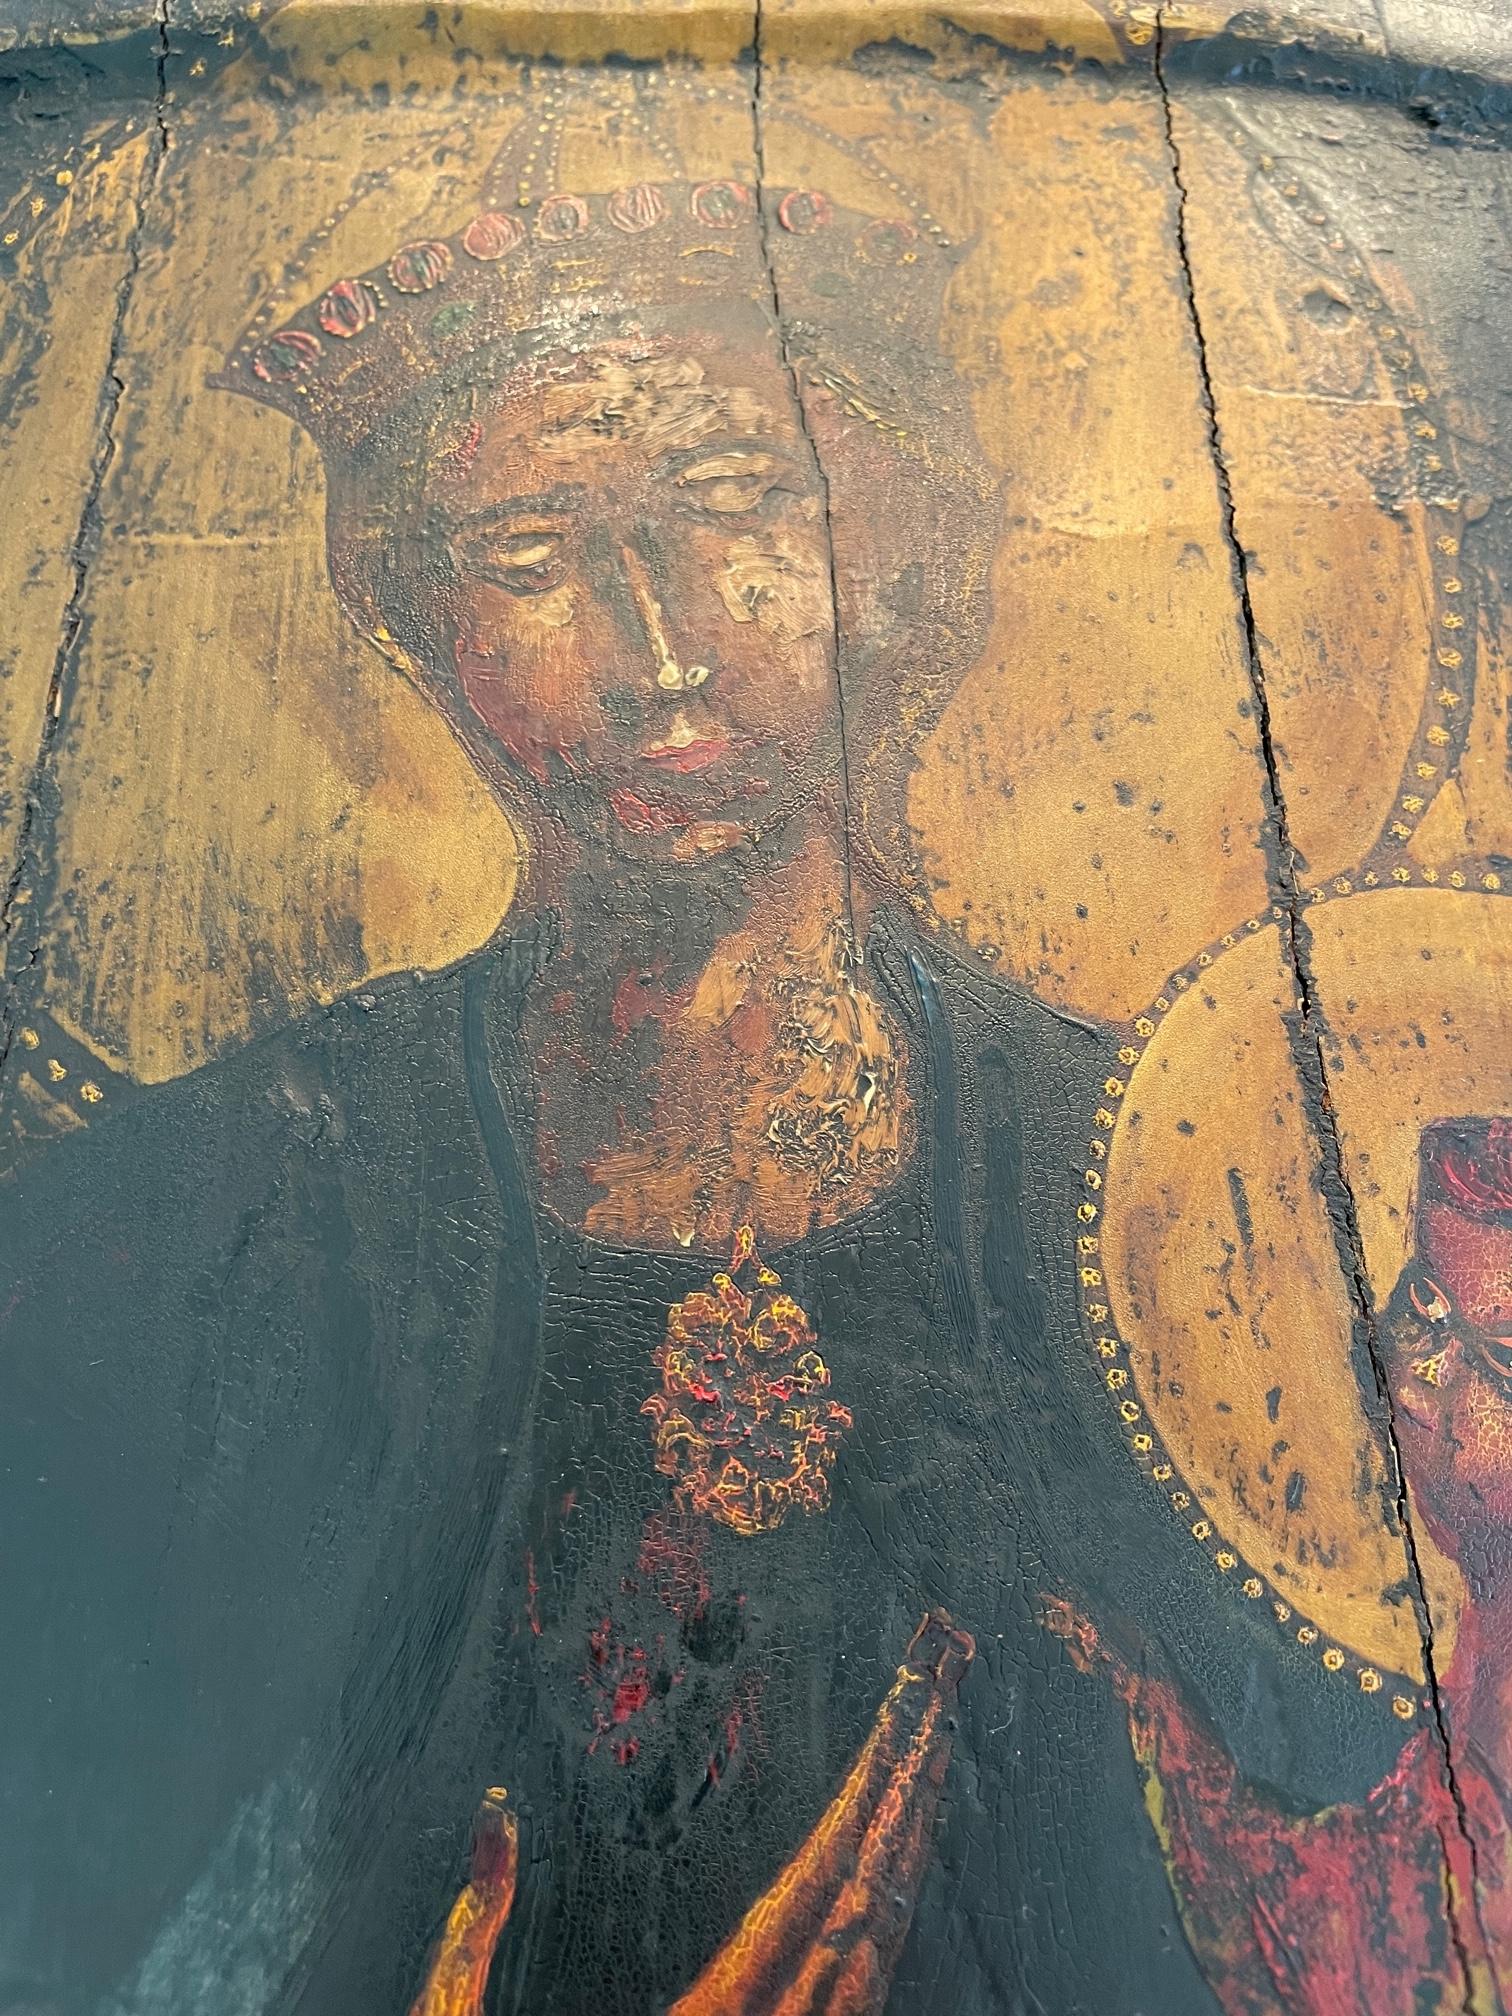 Beautiful old icon of the Mother of God. In Russia, the Kazanskaya Mother of God was one of the most revered icons and the patron saint of women. Therefore a Kazanskaya was always present in the icon corner of a family’s house, next to the icon of